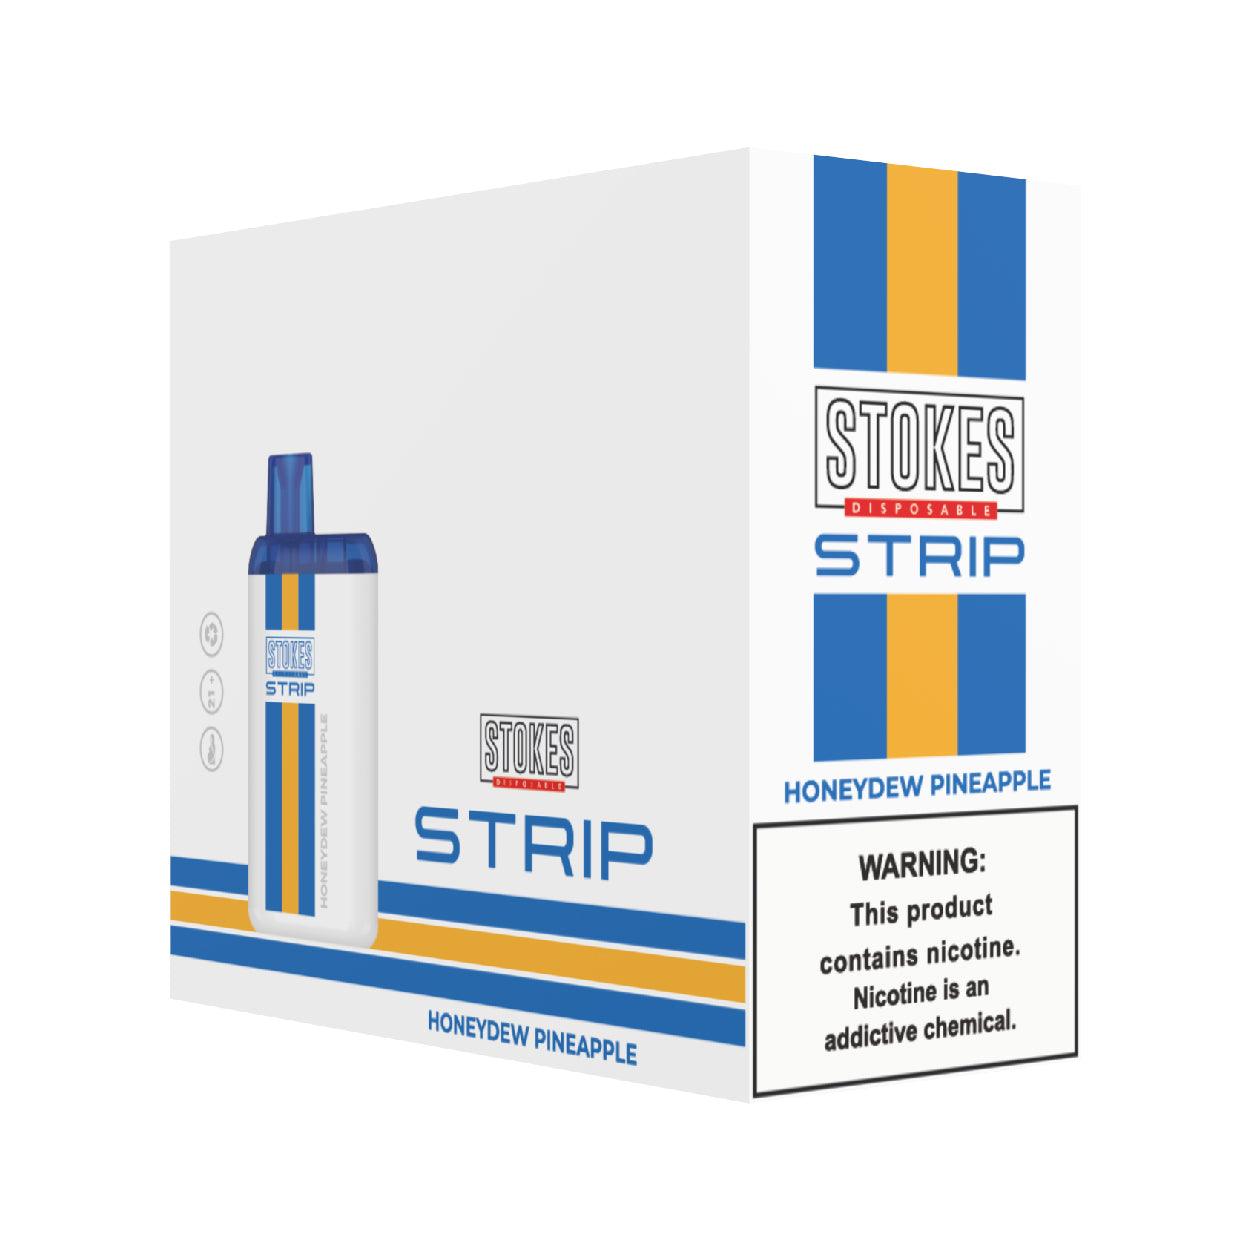 STOKES Strip - 5% Nic. (Disposable Device) - 4000 Puffs - Honey Dew Pineapple